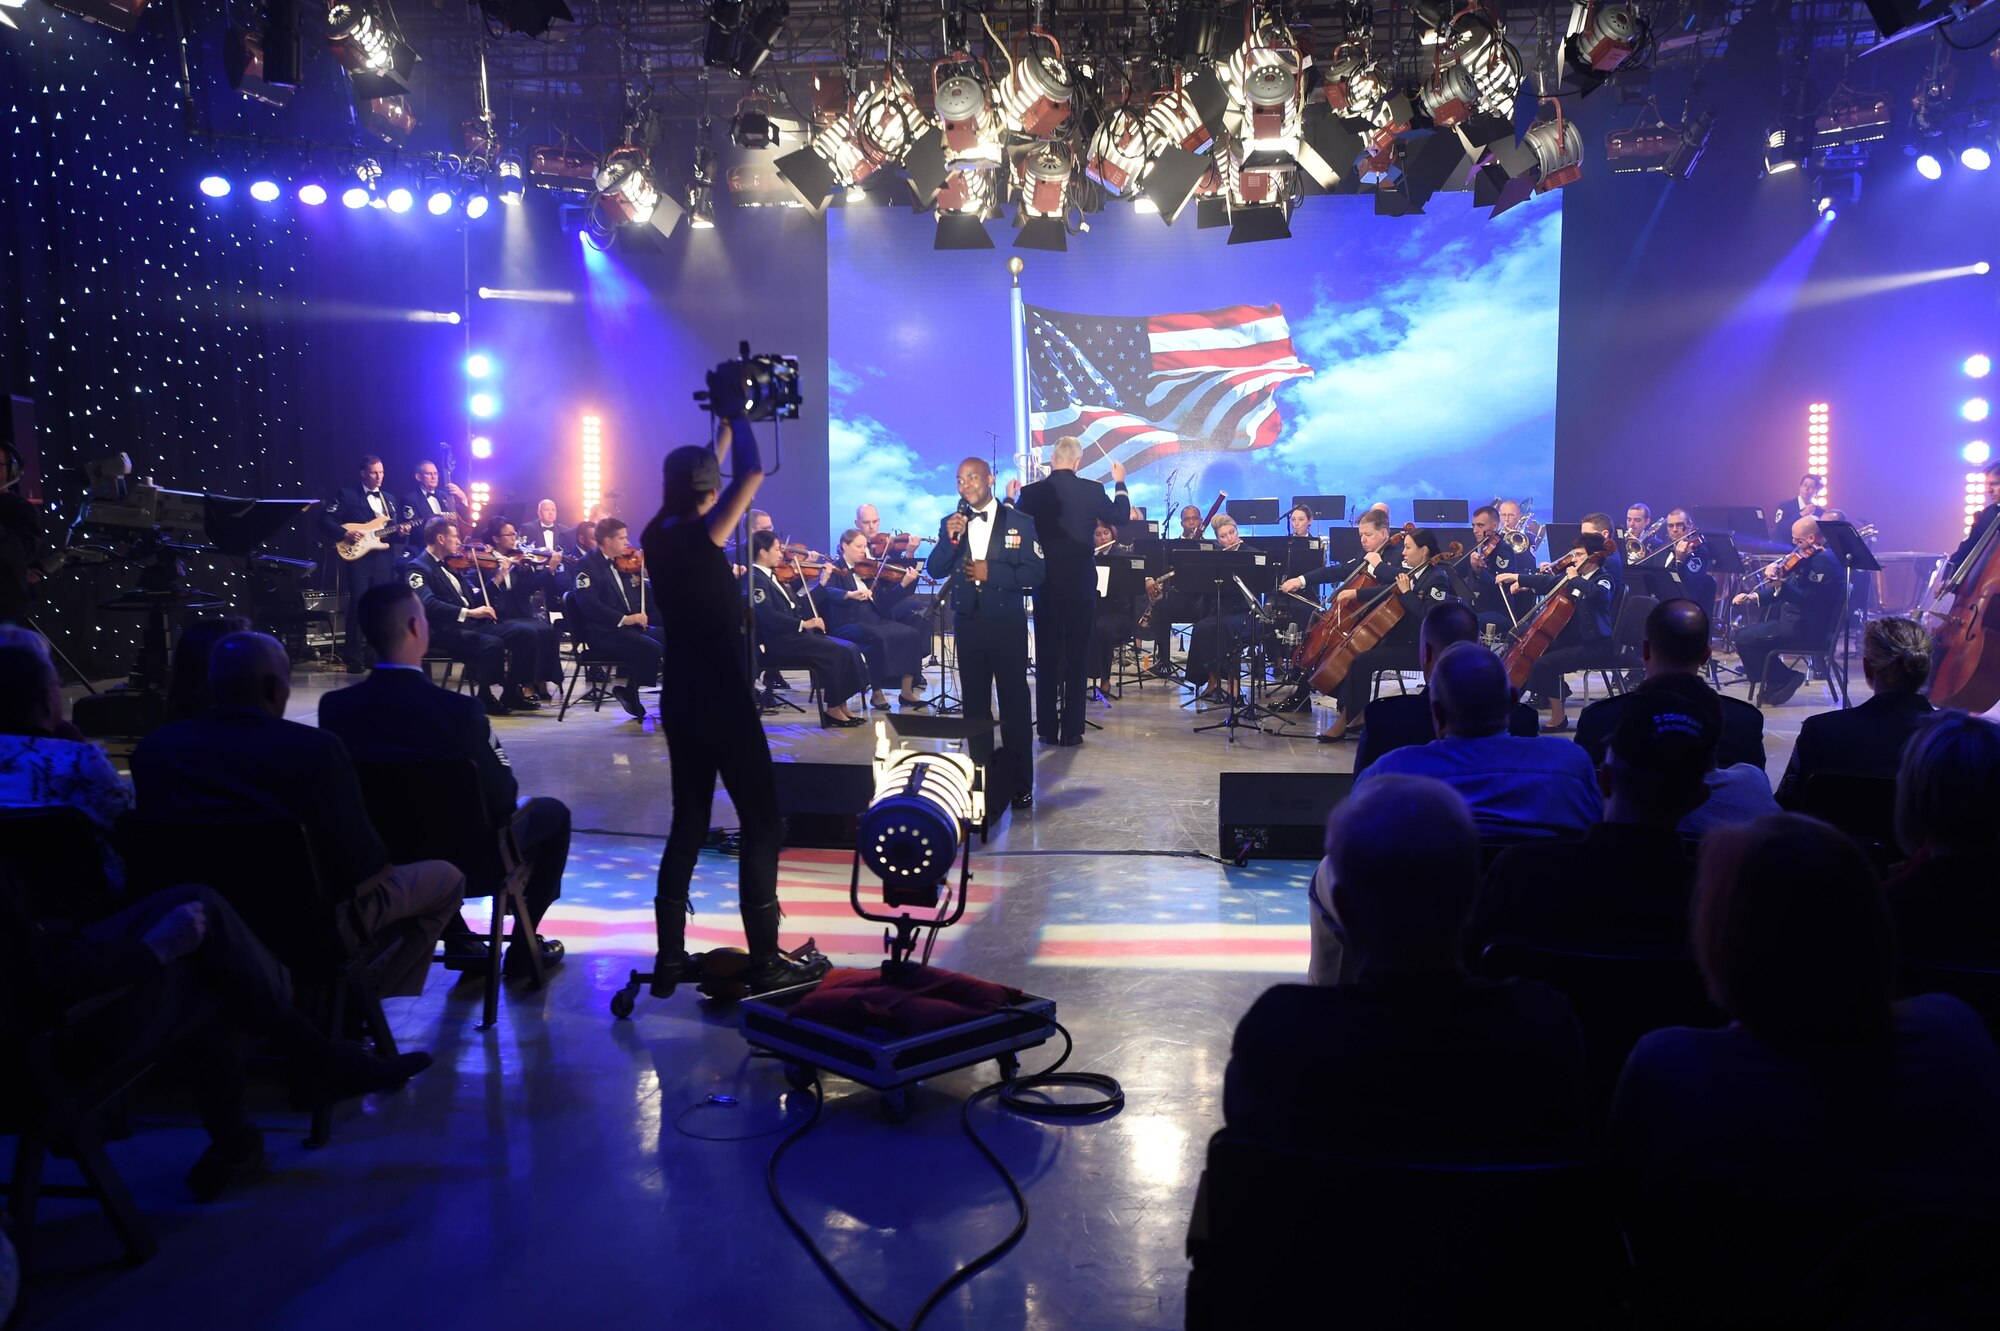 U.S. Air Force Band performs for a live audience at the Maryland Public Television studio during recording of the band’s Veteran’s Day tribute compositions in Owings Mills, MD., Nov. 06, 2015. This is the 10th Veteran’s Day performance the band has done at MPT. (U.S. Air Force photo/Senior Airman Joshua R. M. Dewberry)